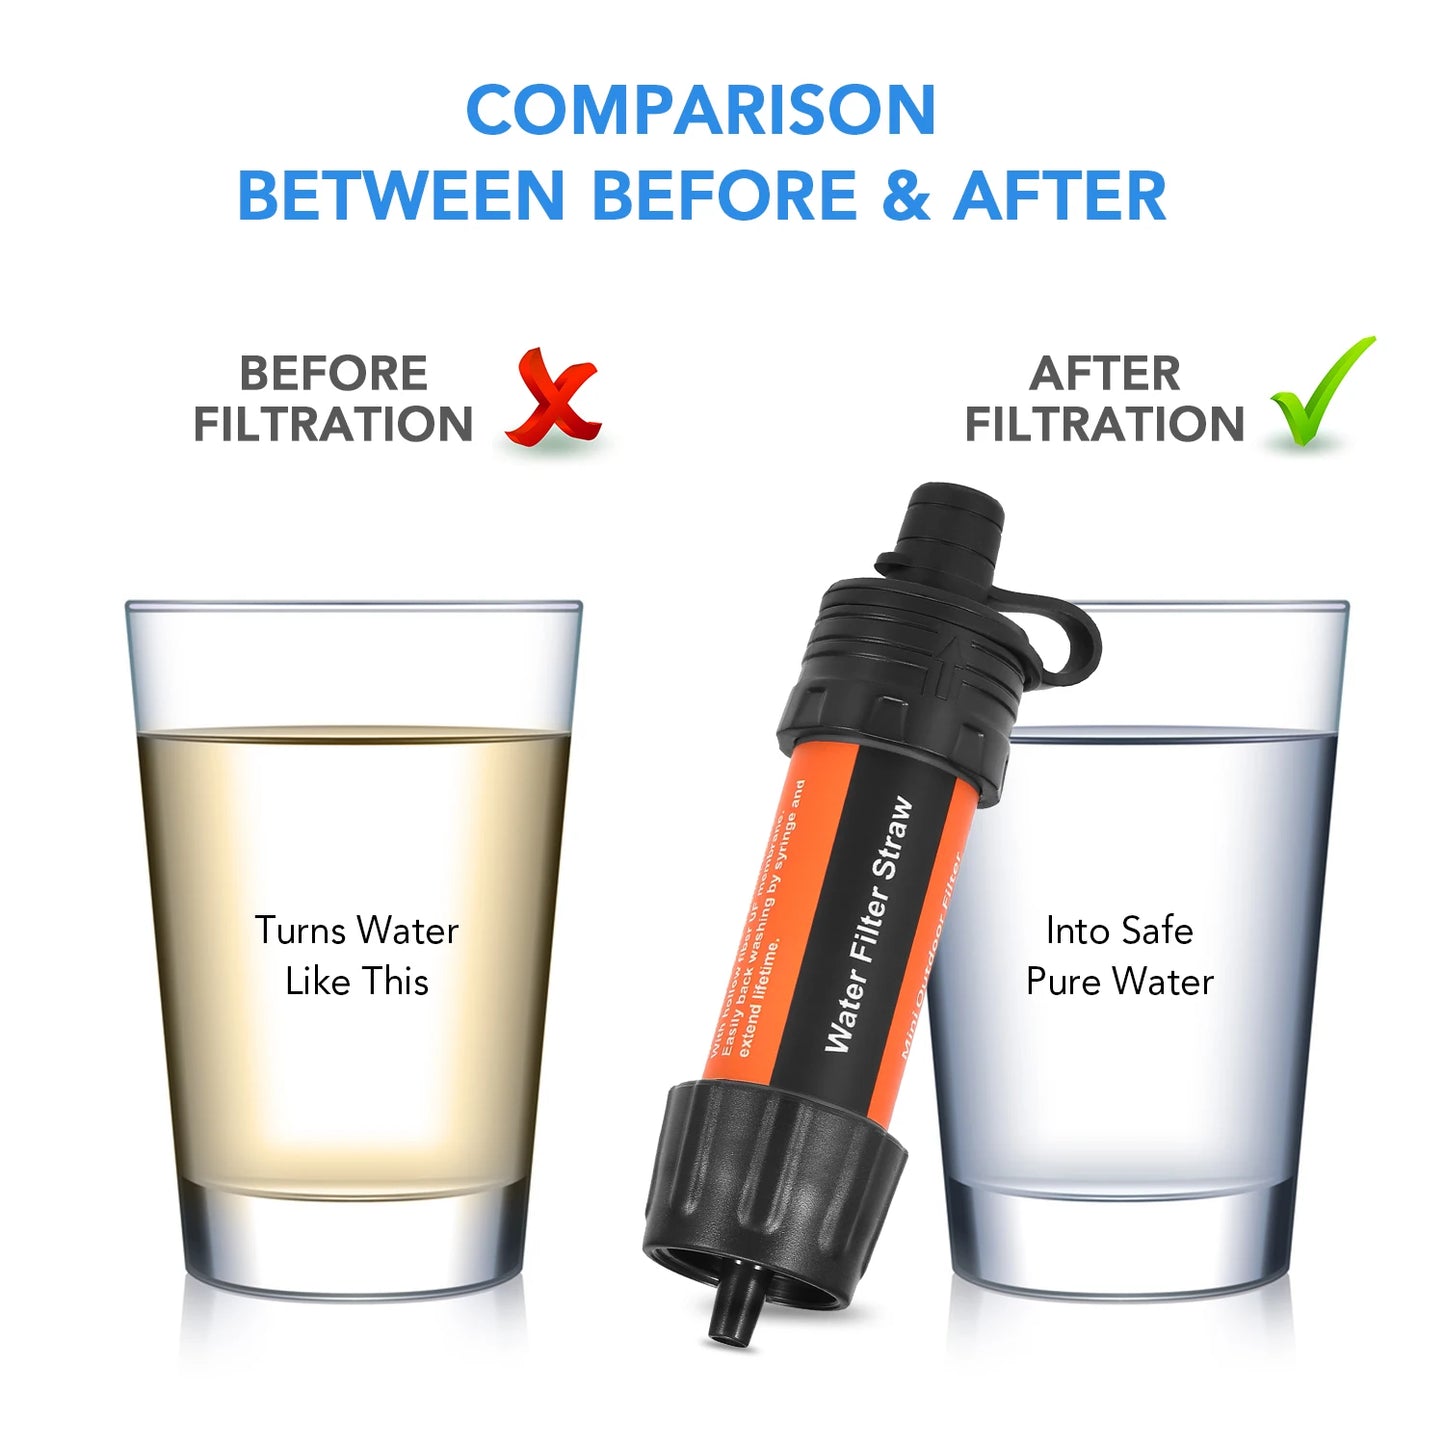 5000L Portable Water  Water Filtration Straw- Emergency Survival Tool